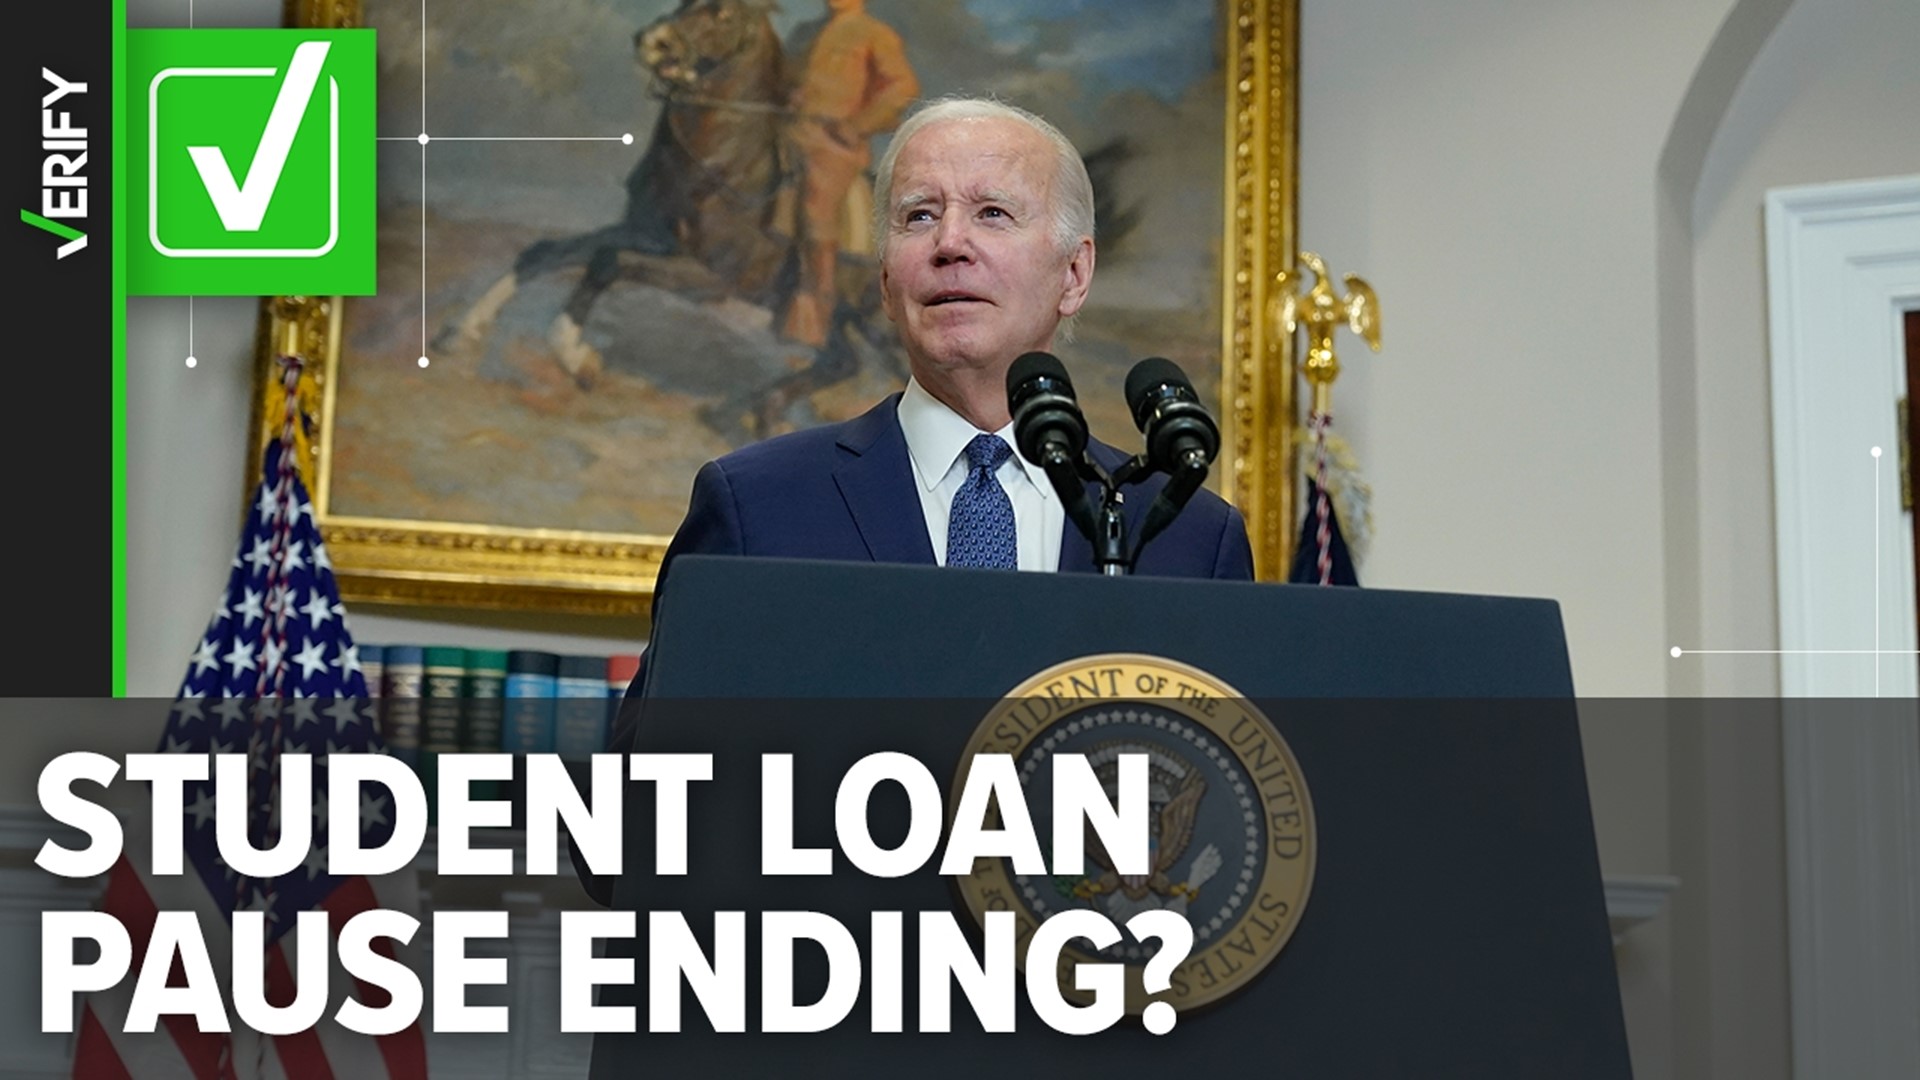 Several VERIFY readers asked what the debt ceiling deal means for their student loan payments. Here’s what borrowers need to know.